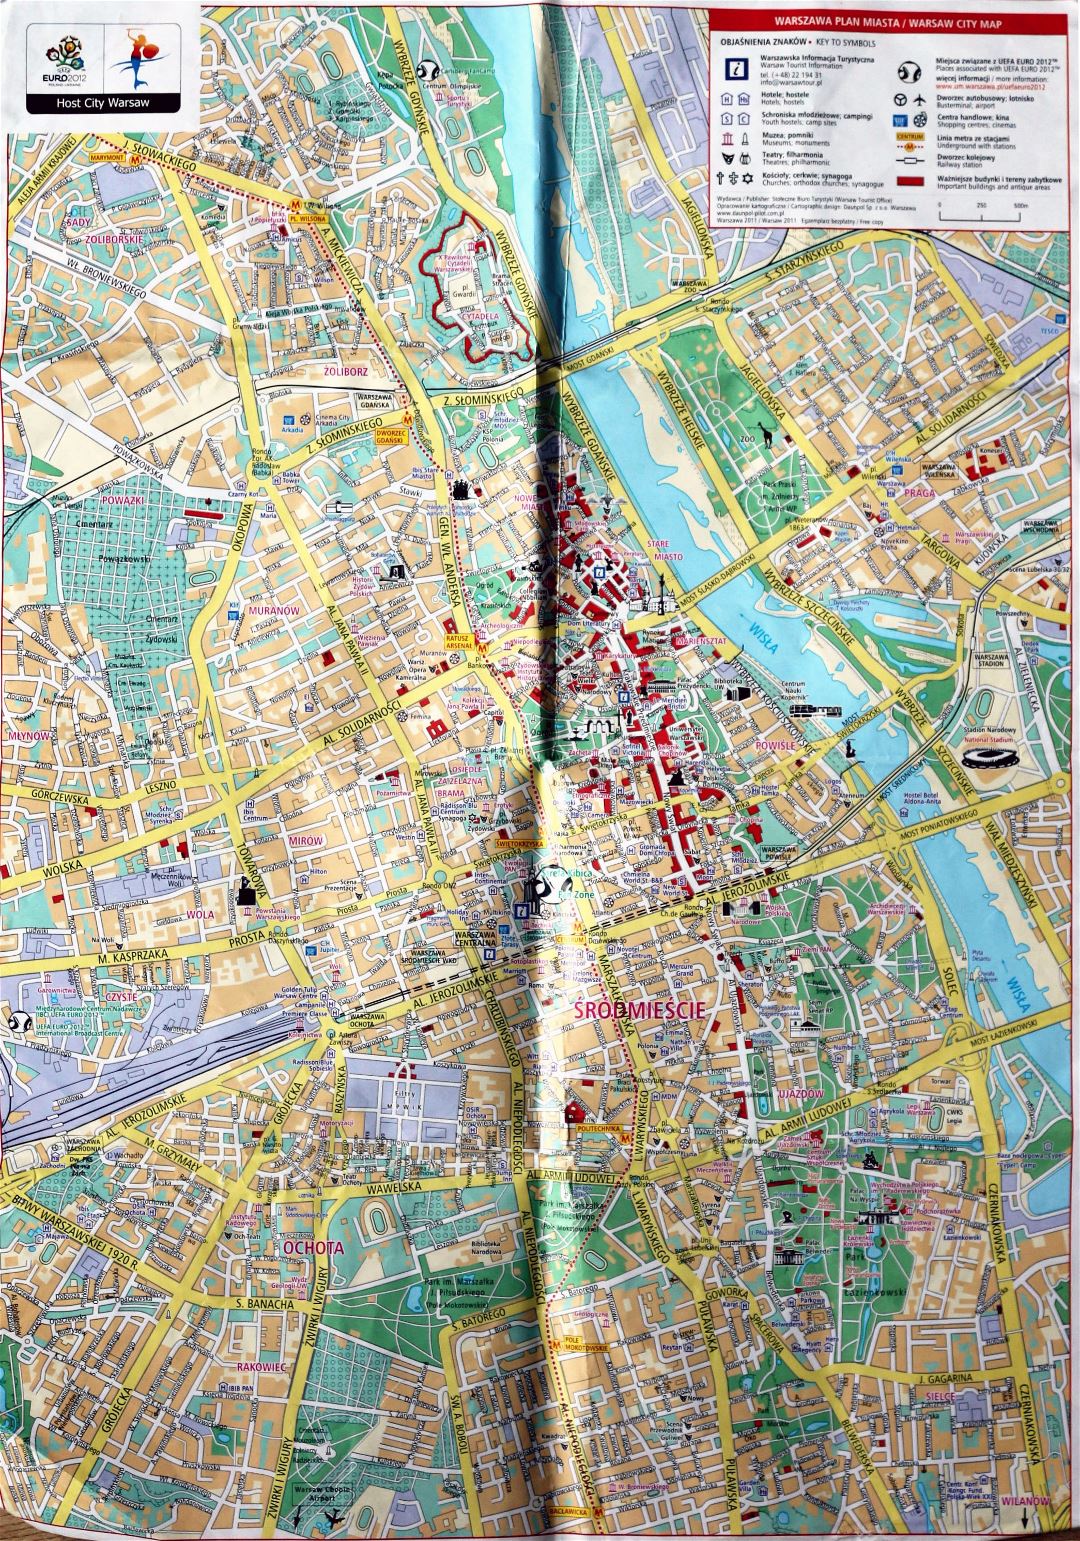 Detailed guide map of central part of Warsaw city